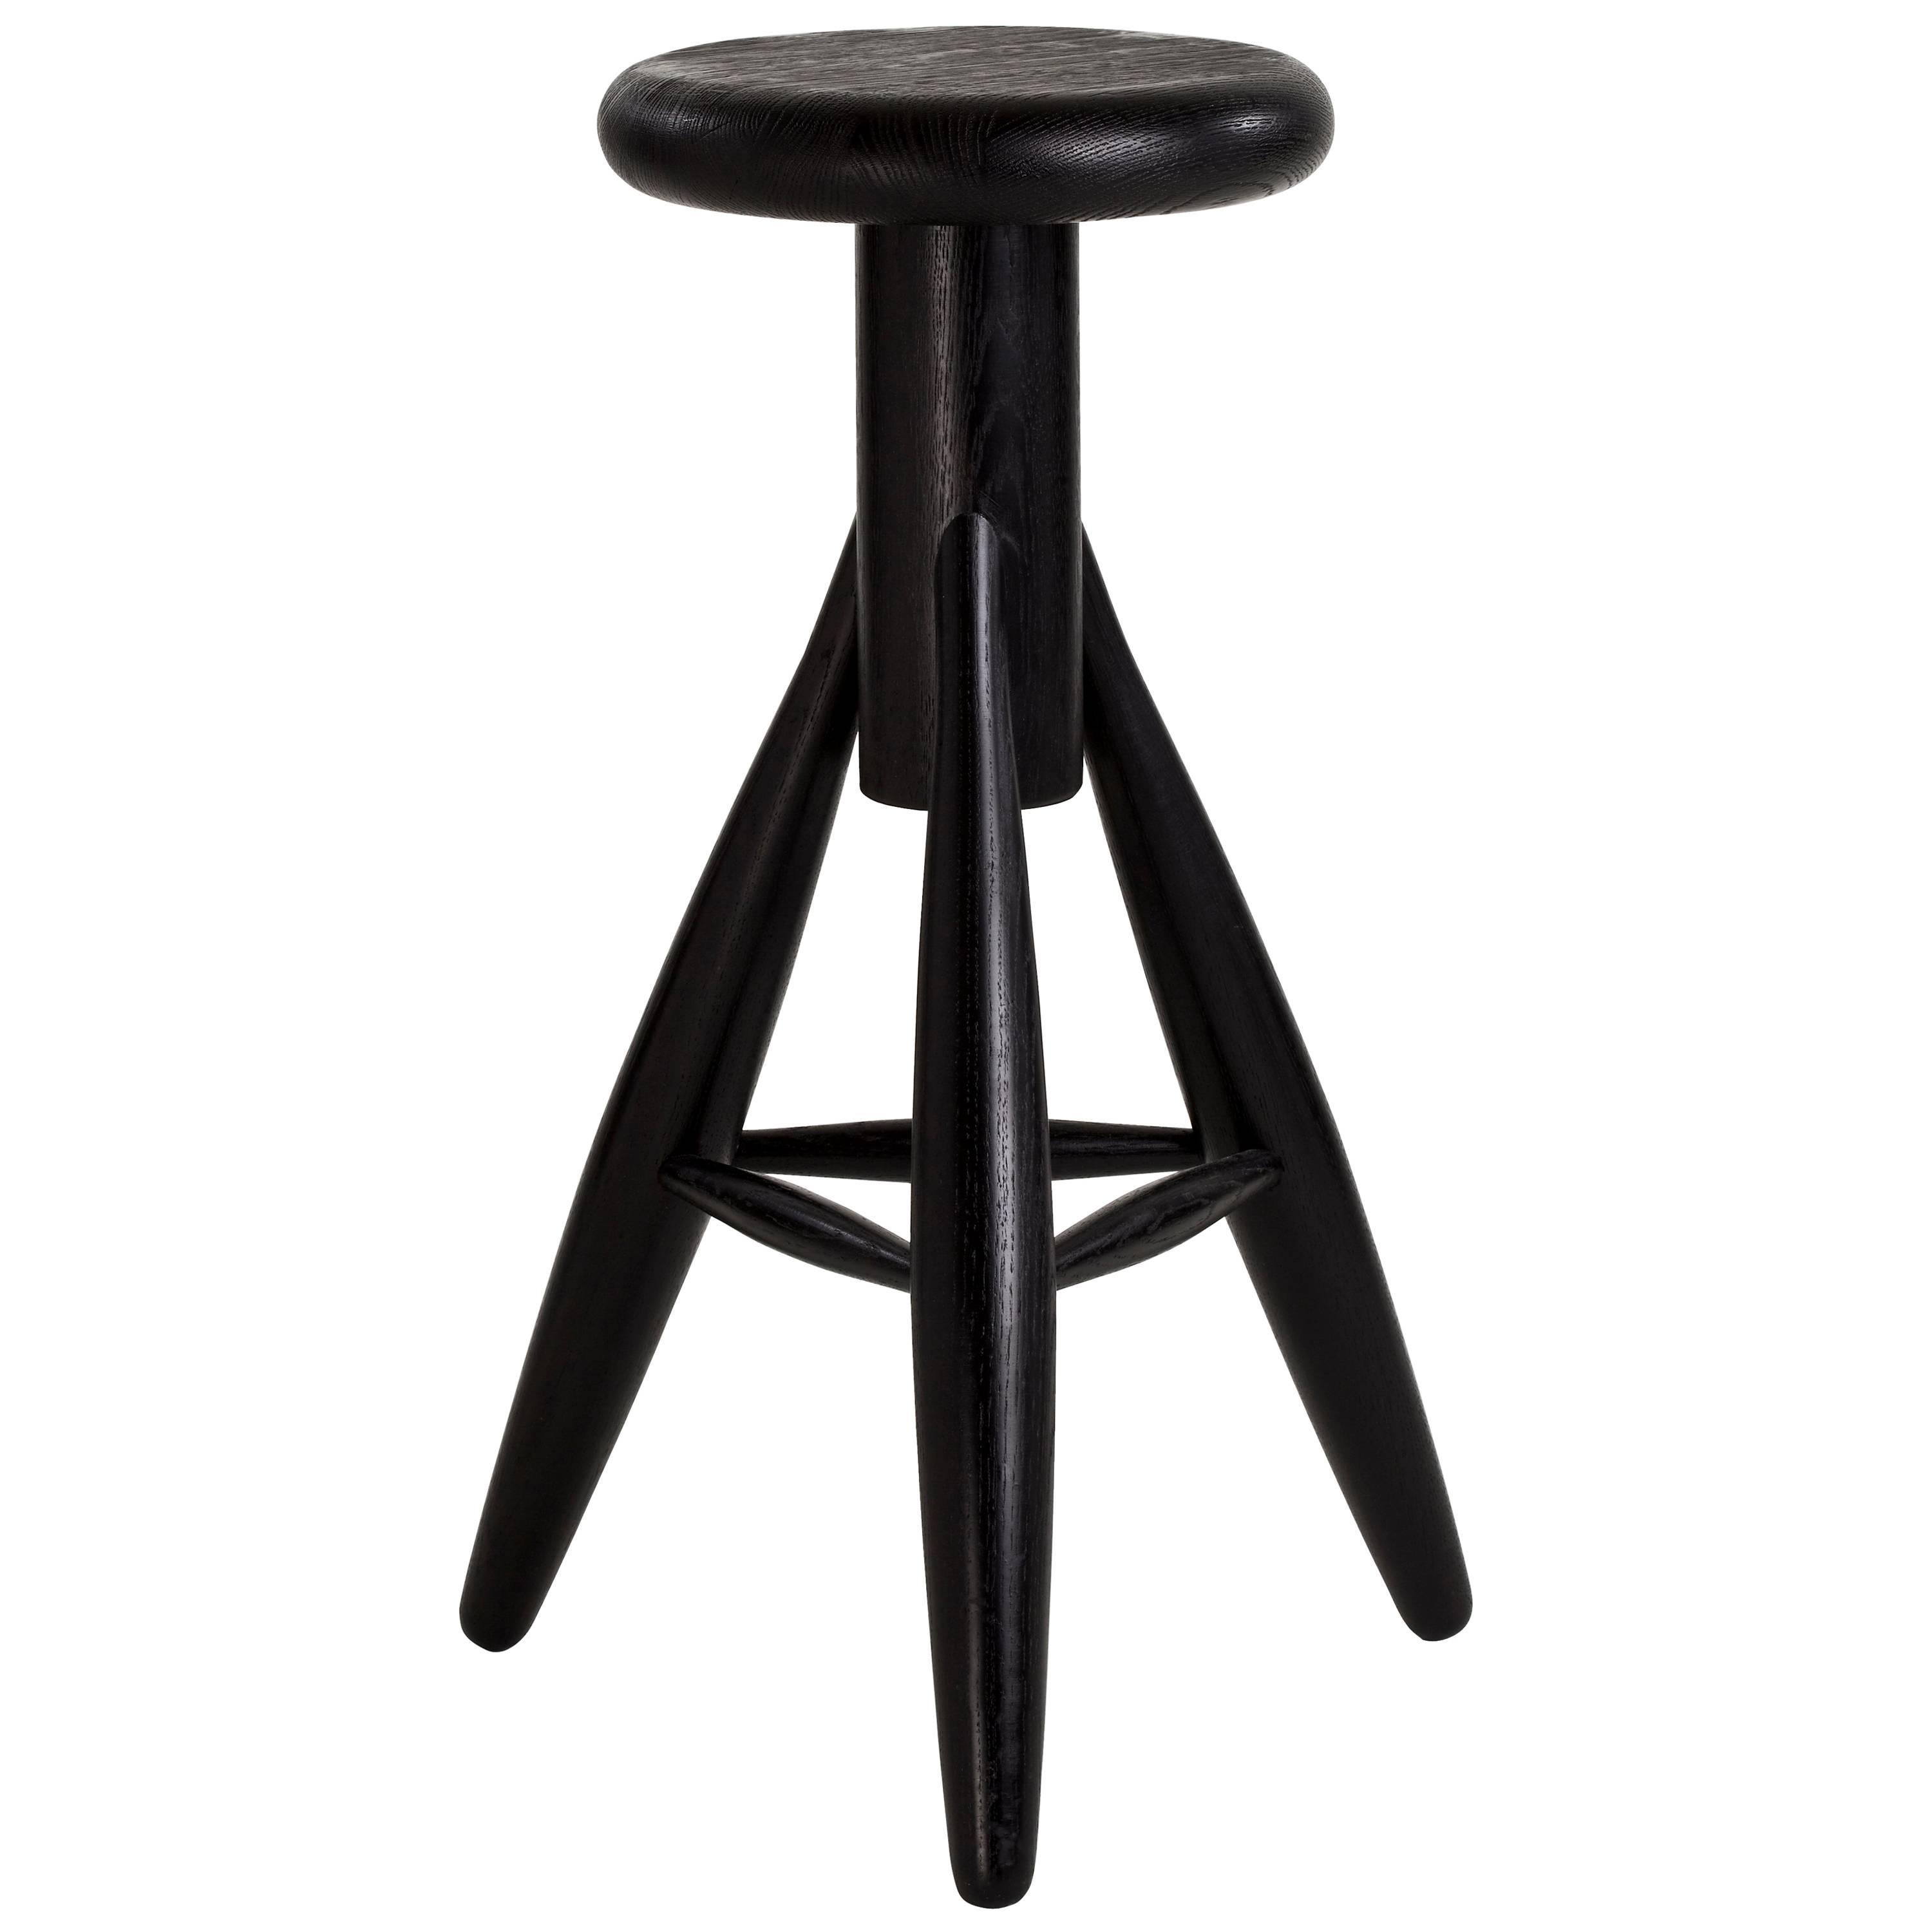 Authentic Rocket Bar Stool in Oak with Black Lacquer by Eero Aarnio & Artek For Sale